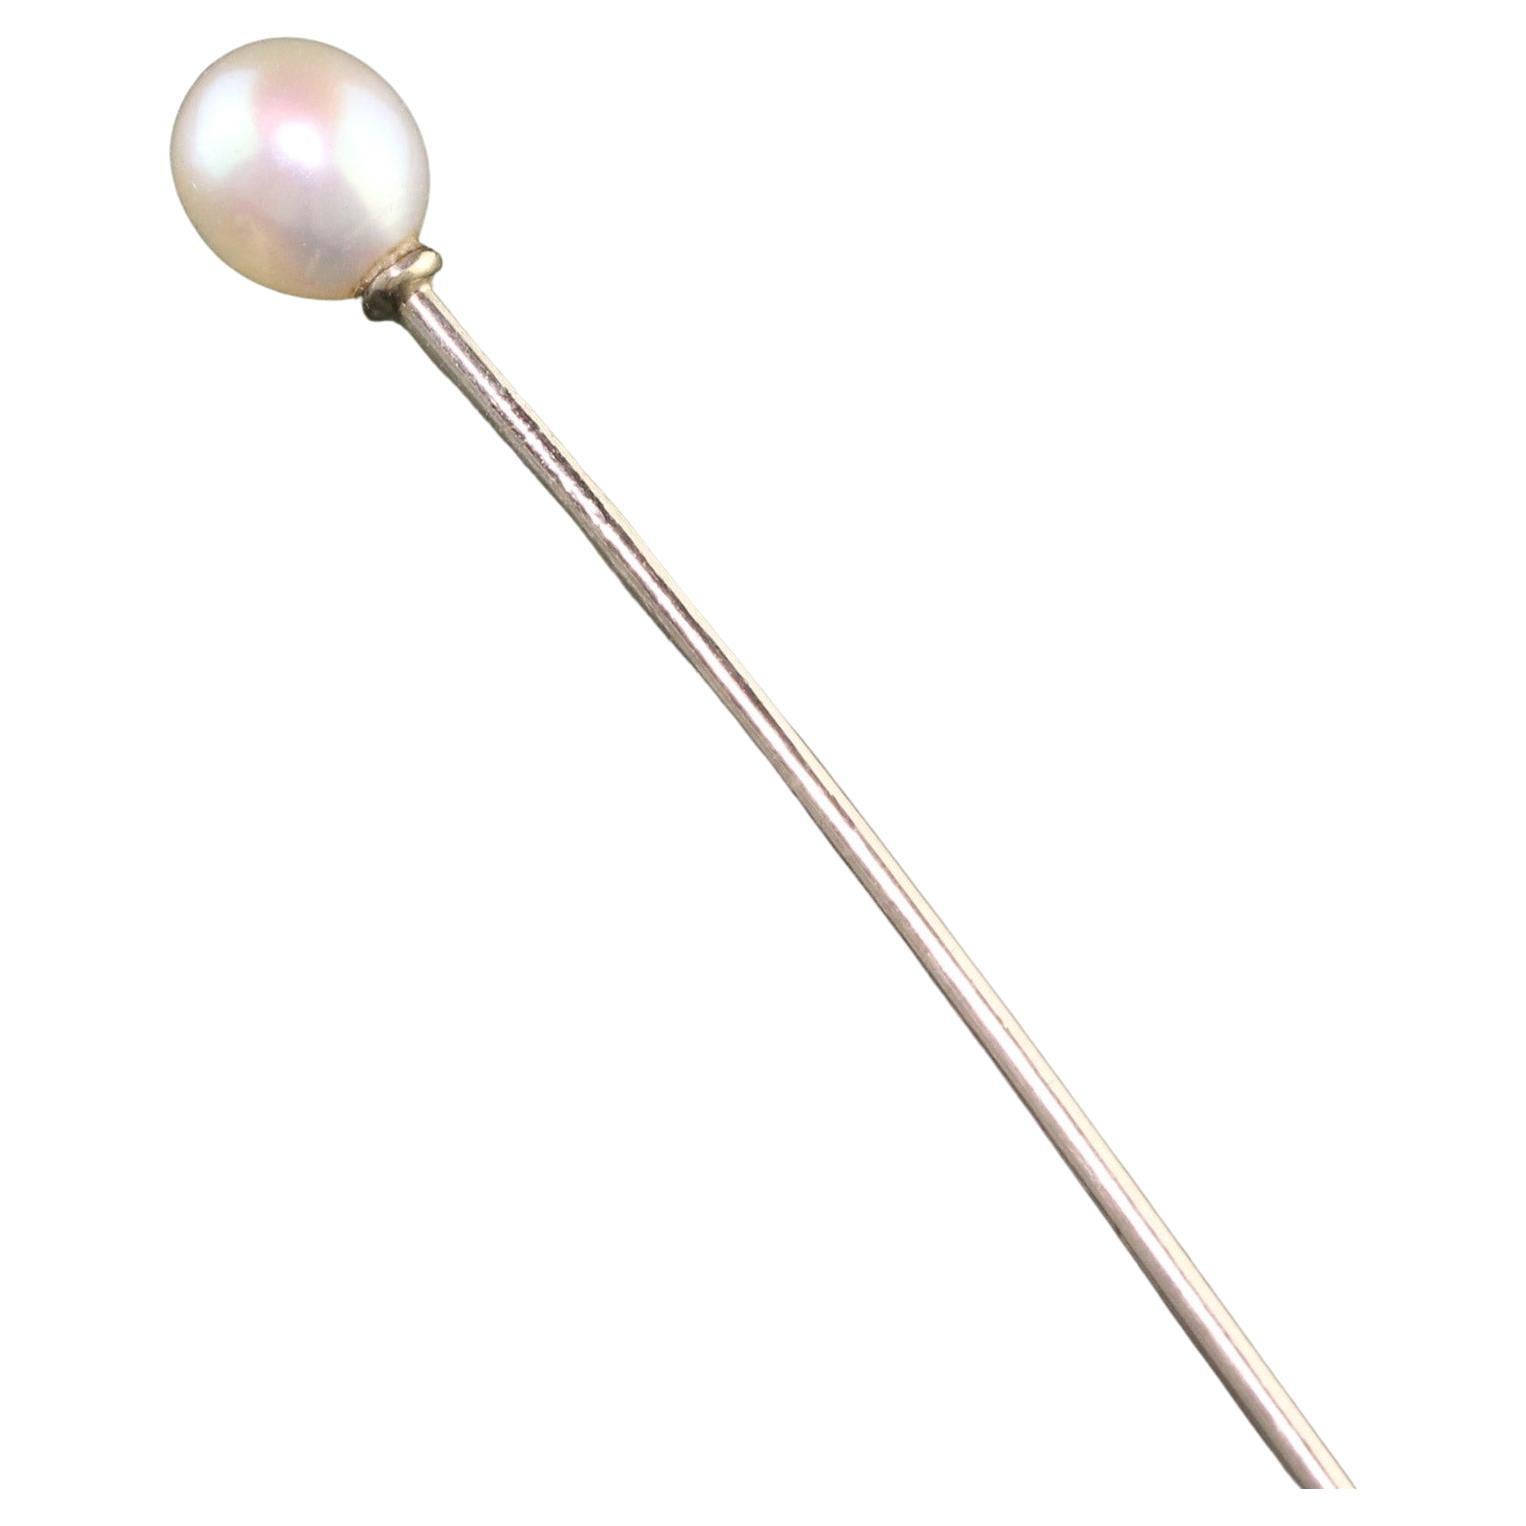 Antique Art Deco 14K White Gold Natural Pearl Stick Pin For Sale